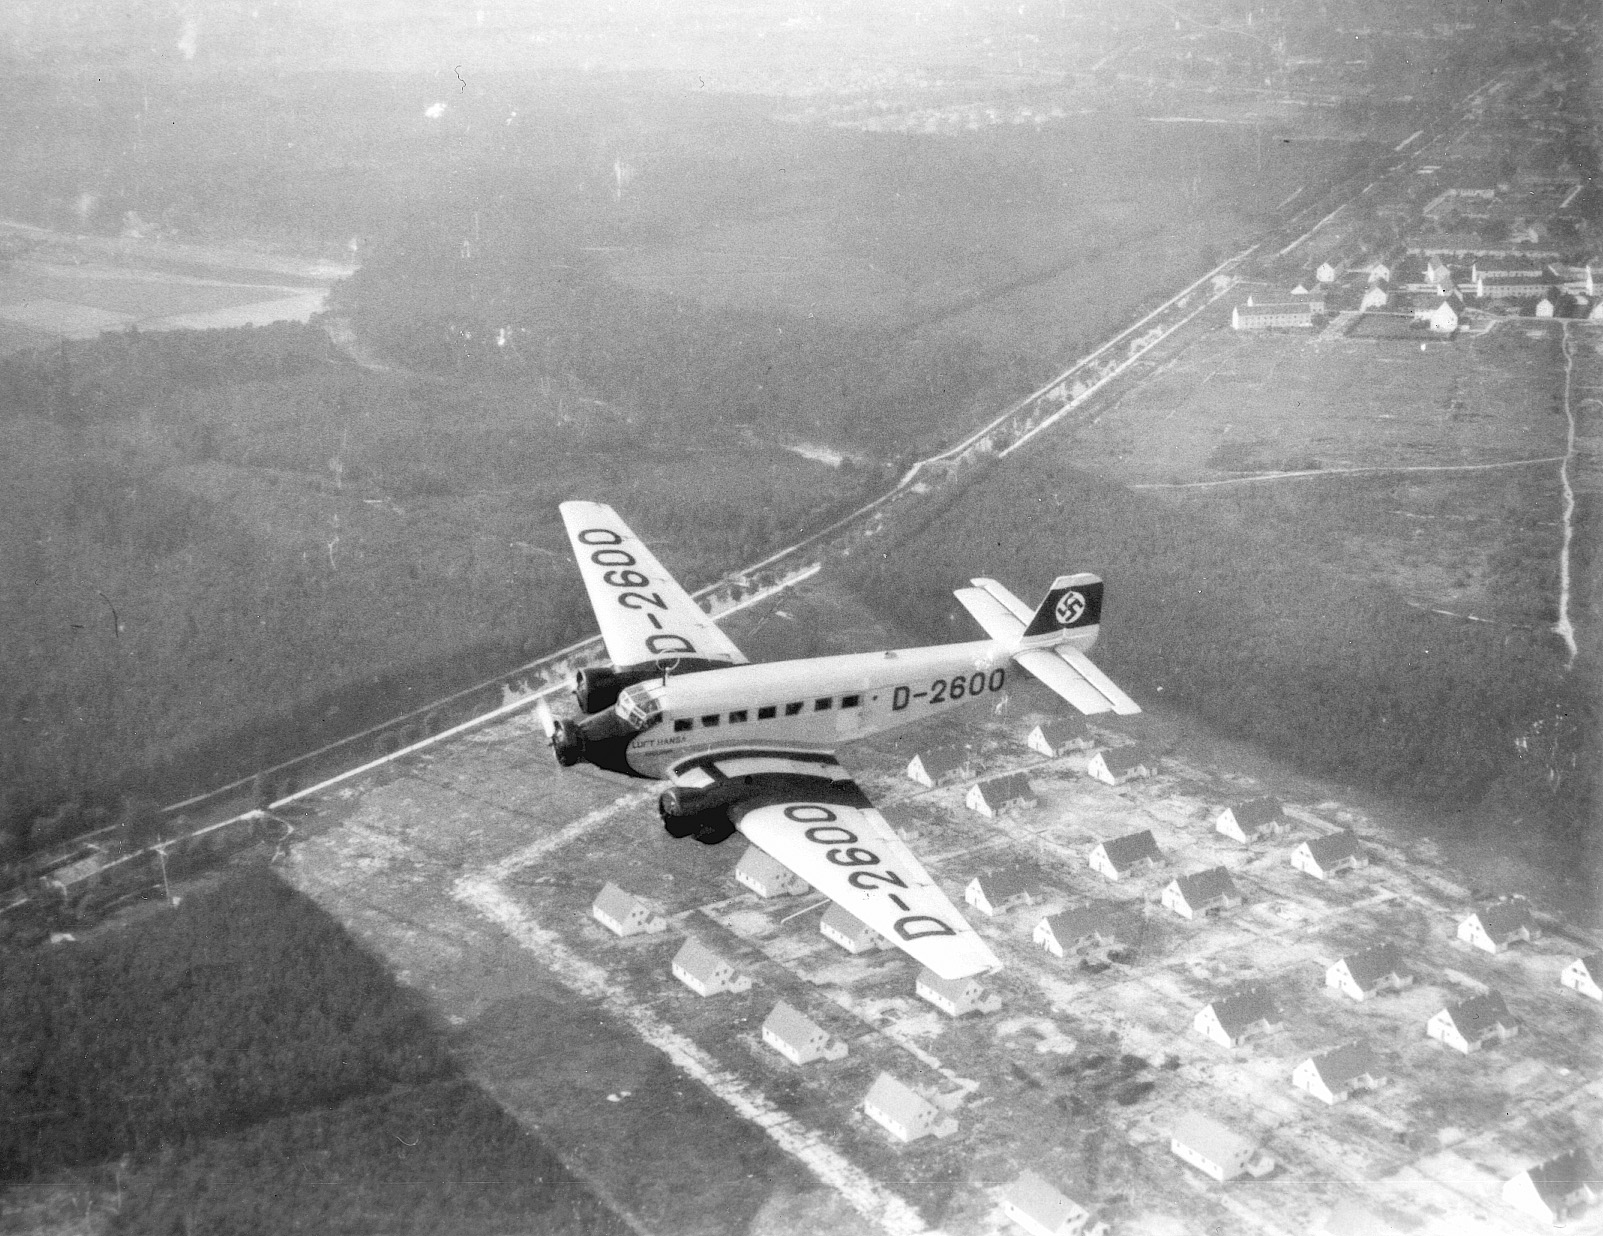 The Führer’s first official plane was a Junkers Ju-52, numbered D-2600.